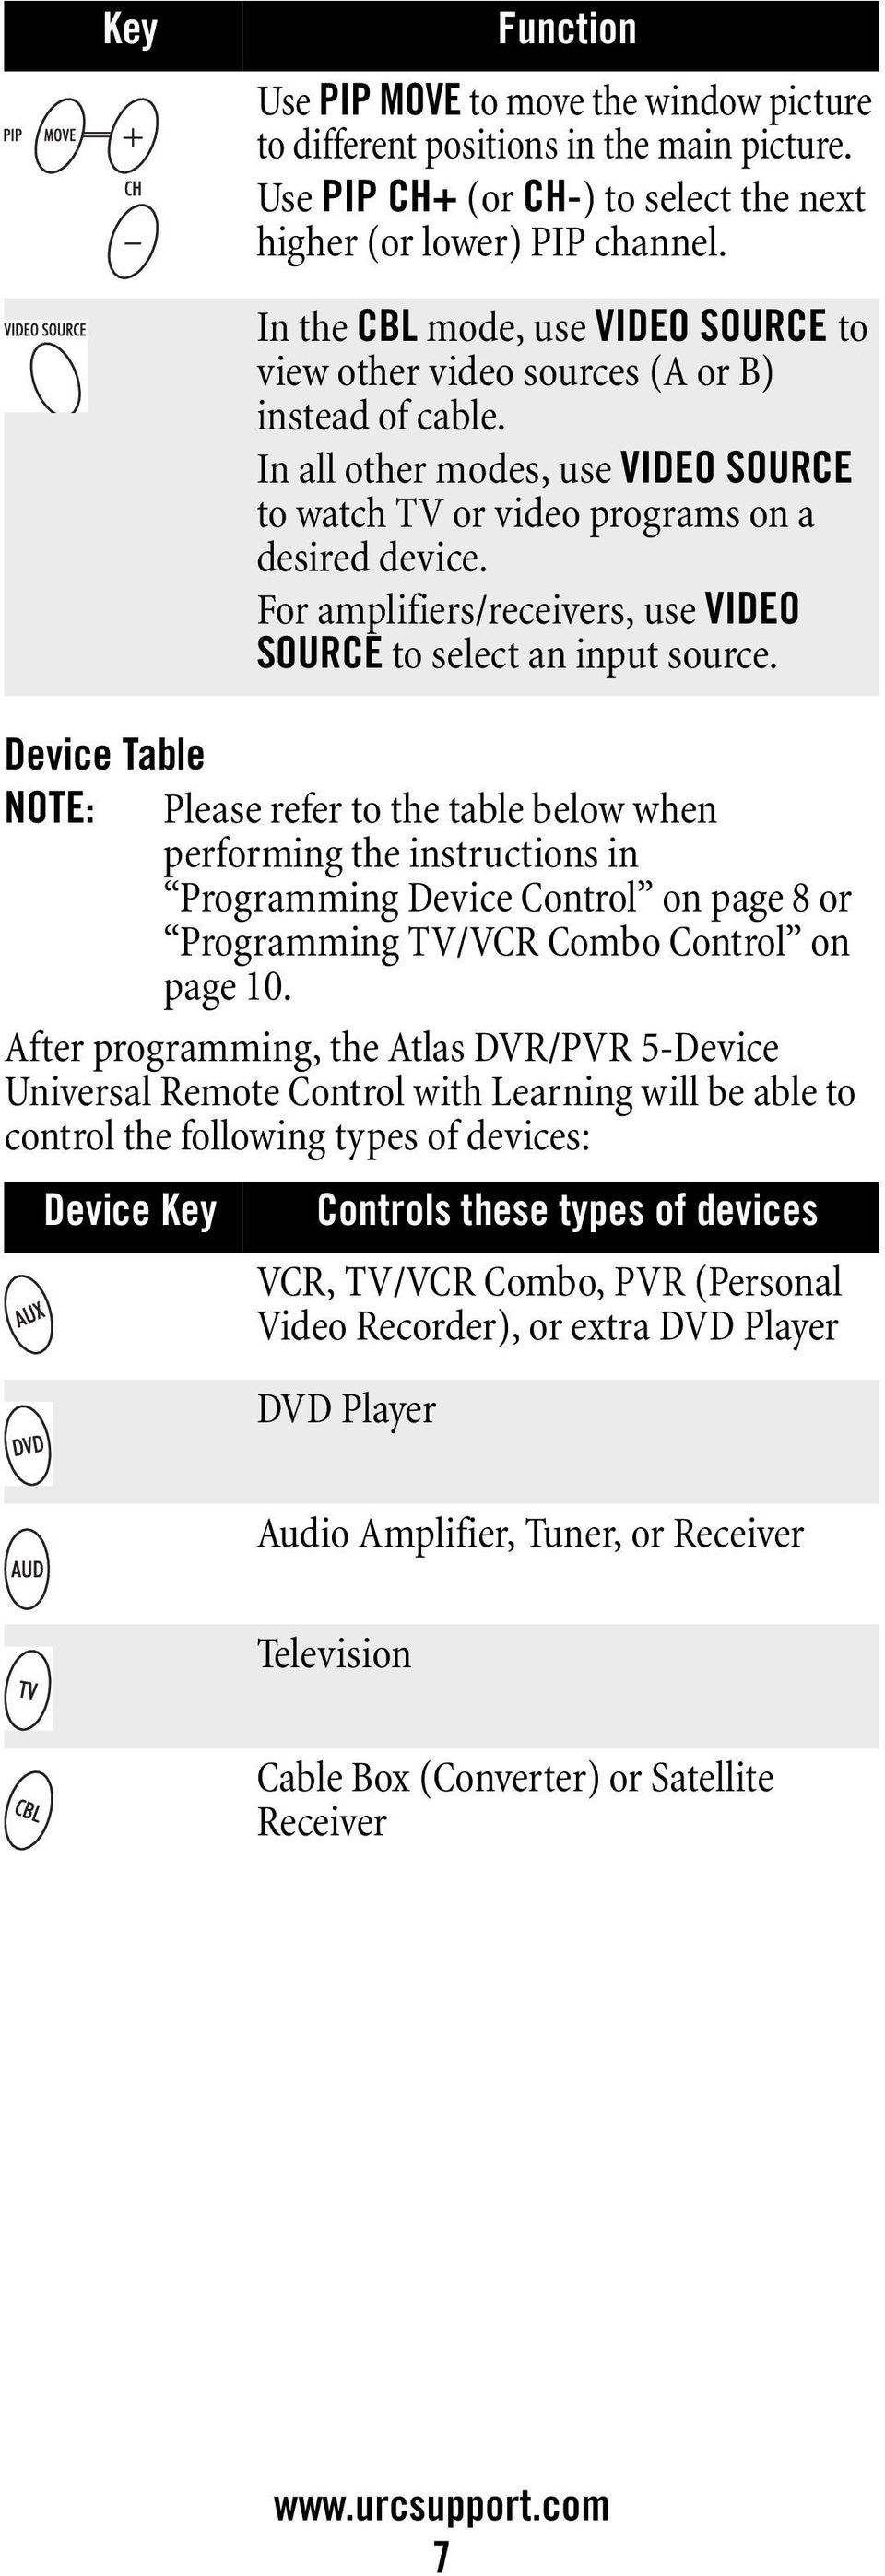 For amplifiers/receivers, use VIDEO SOURCE to select an input source.